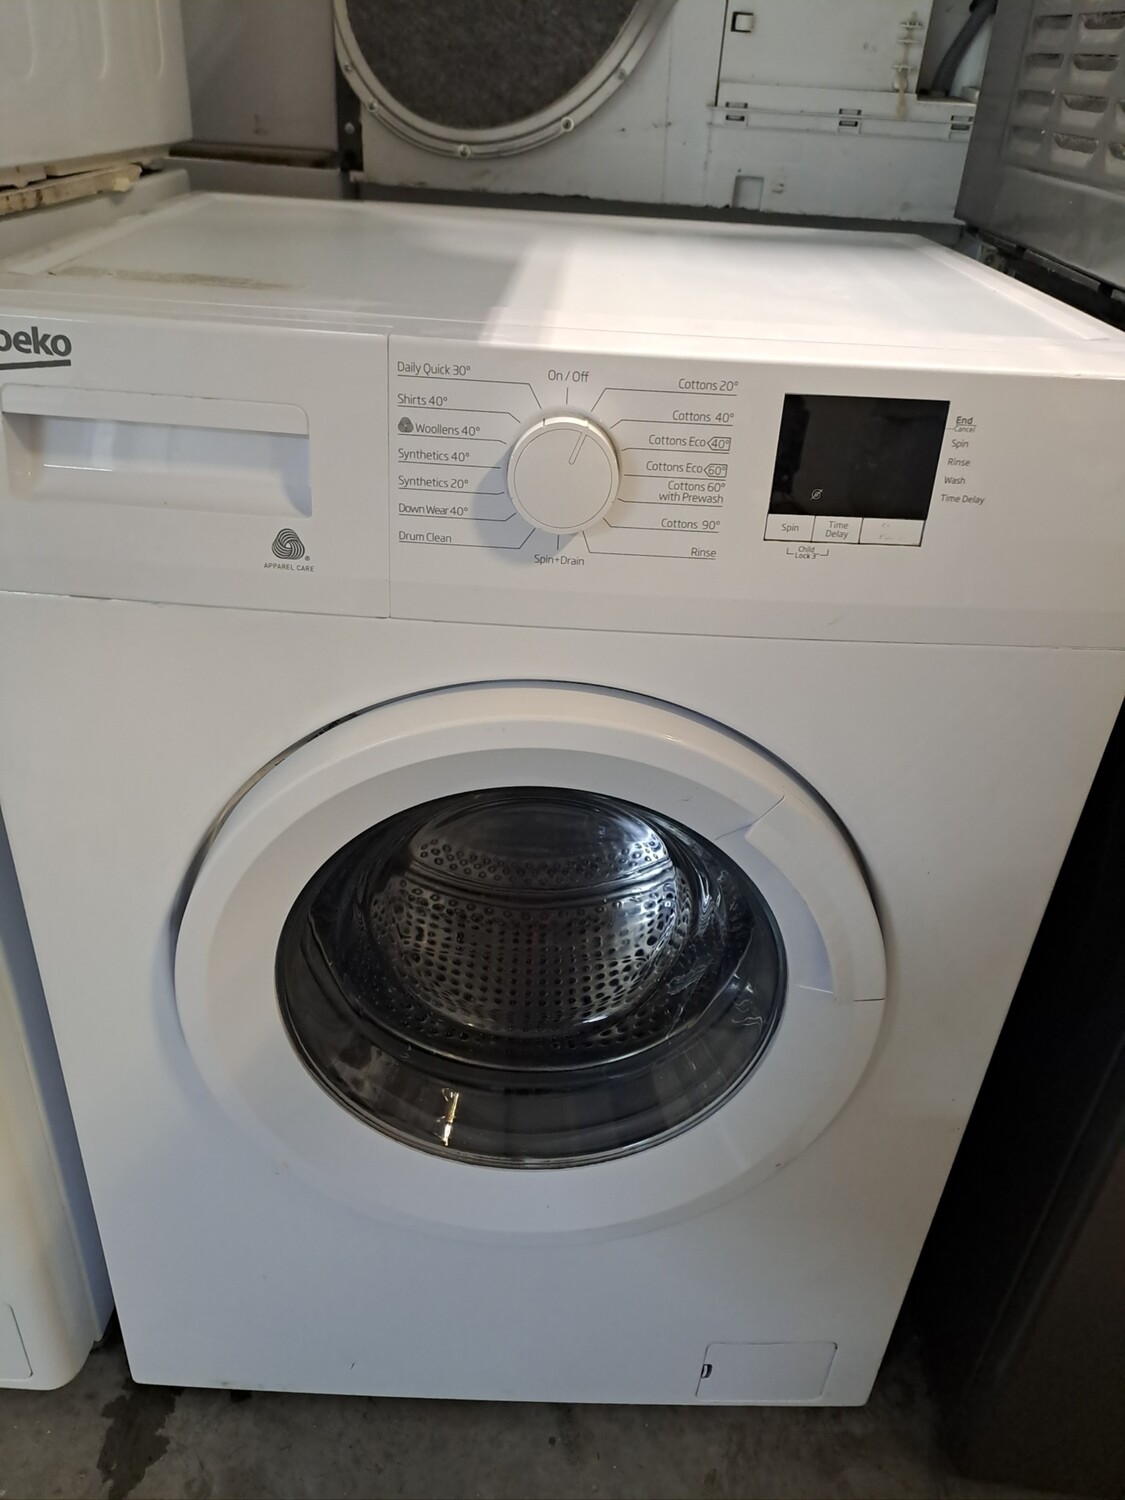 Beko WTB720E1W 7kg Load 1200 Spin Washing Machine - White - Refurbished - 6 Month Guarantee. This item is located in our Whitby Road Shop 